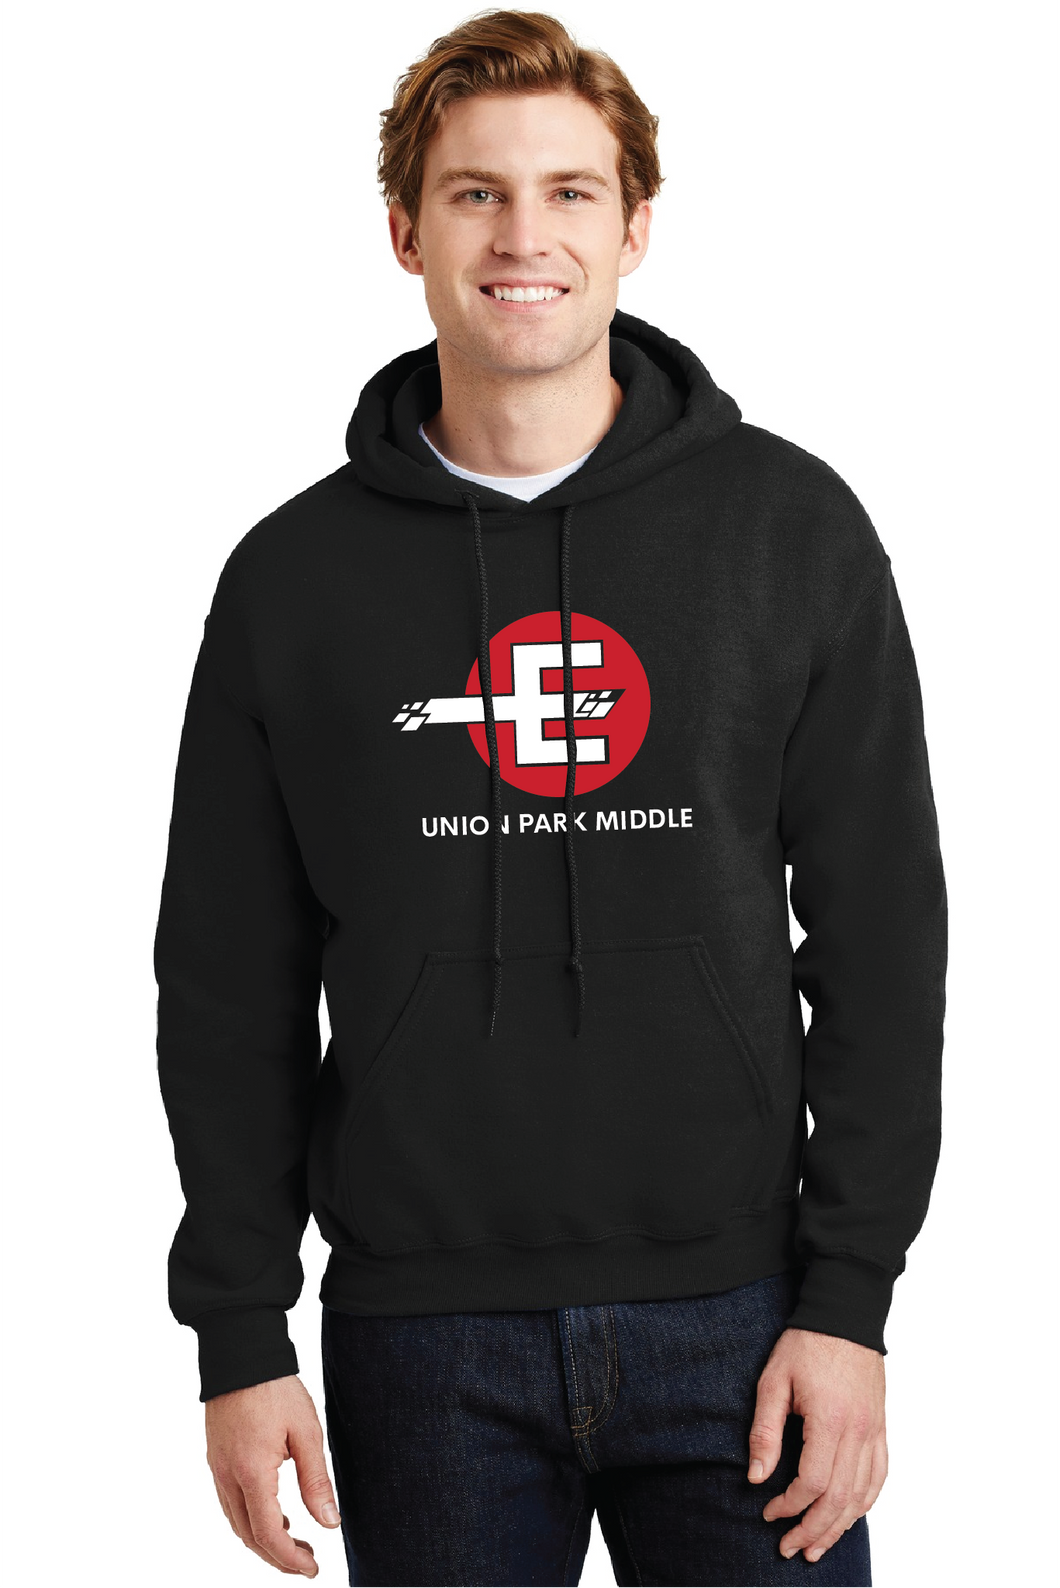 Union Park Middle Hoodie